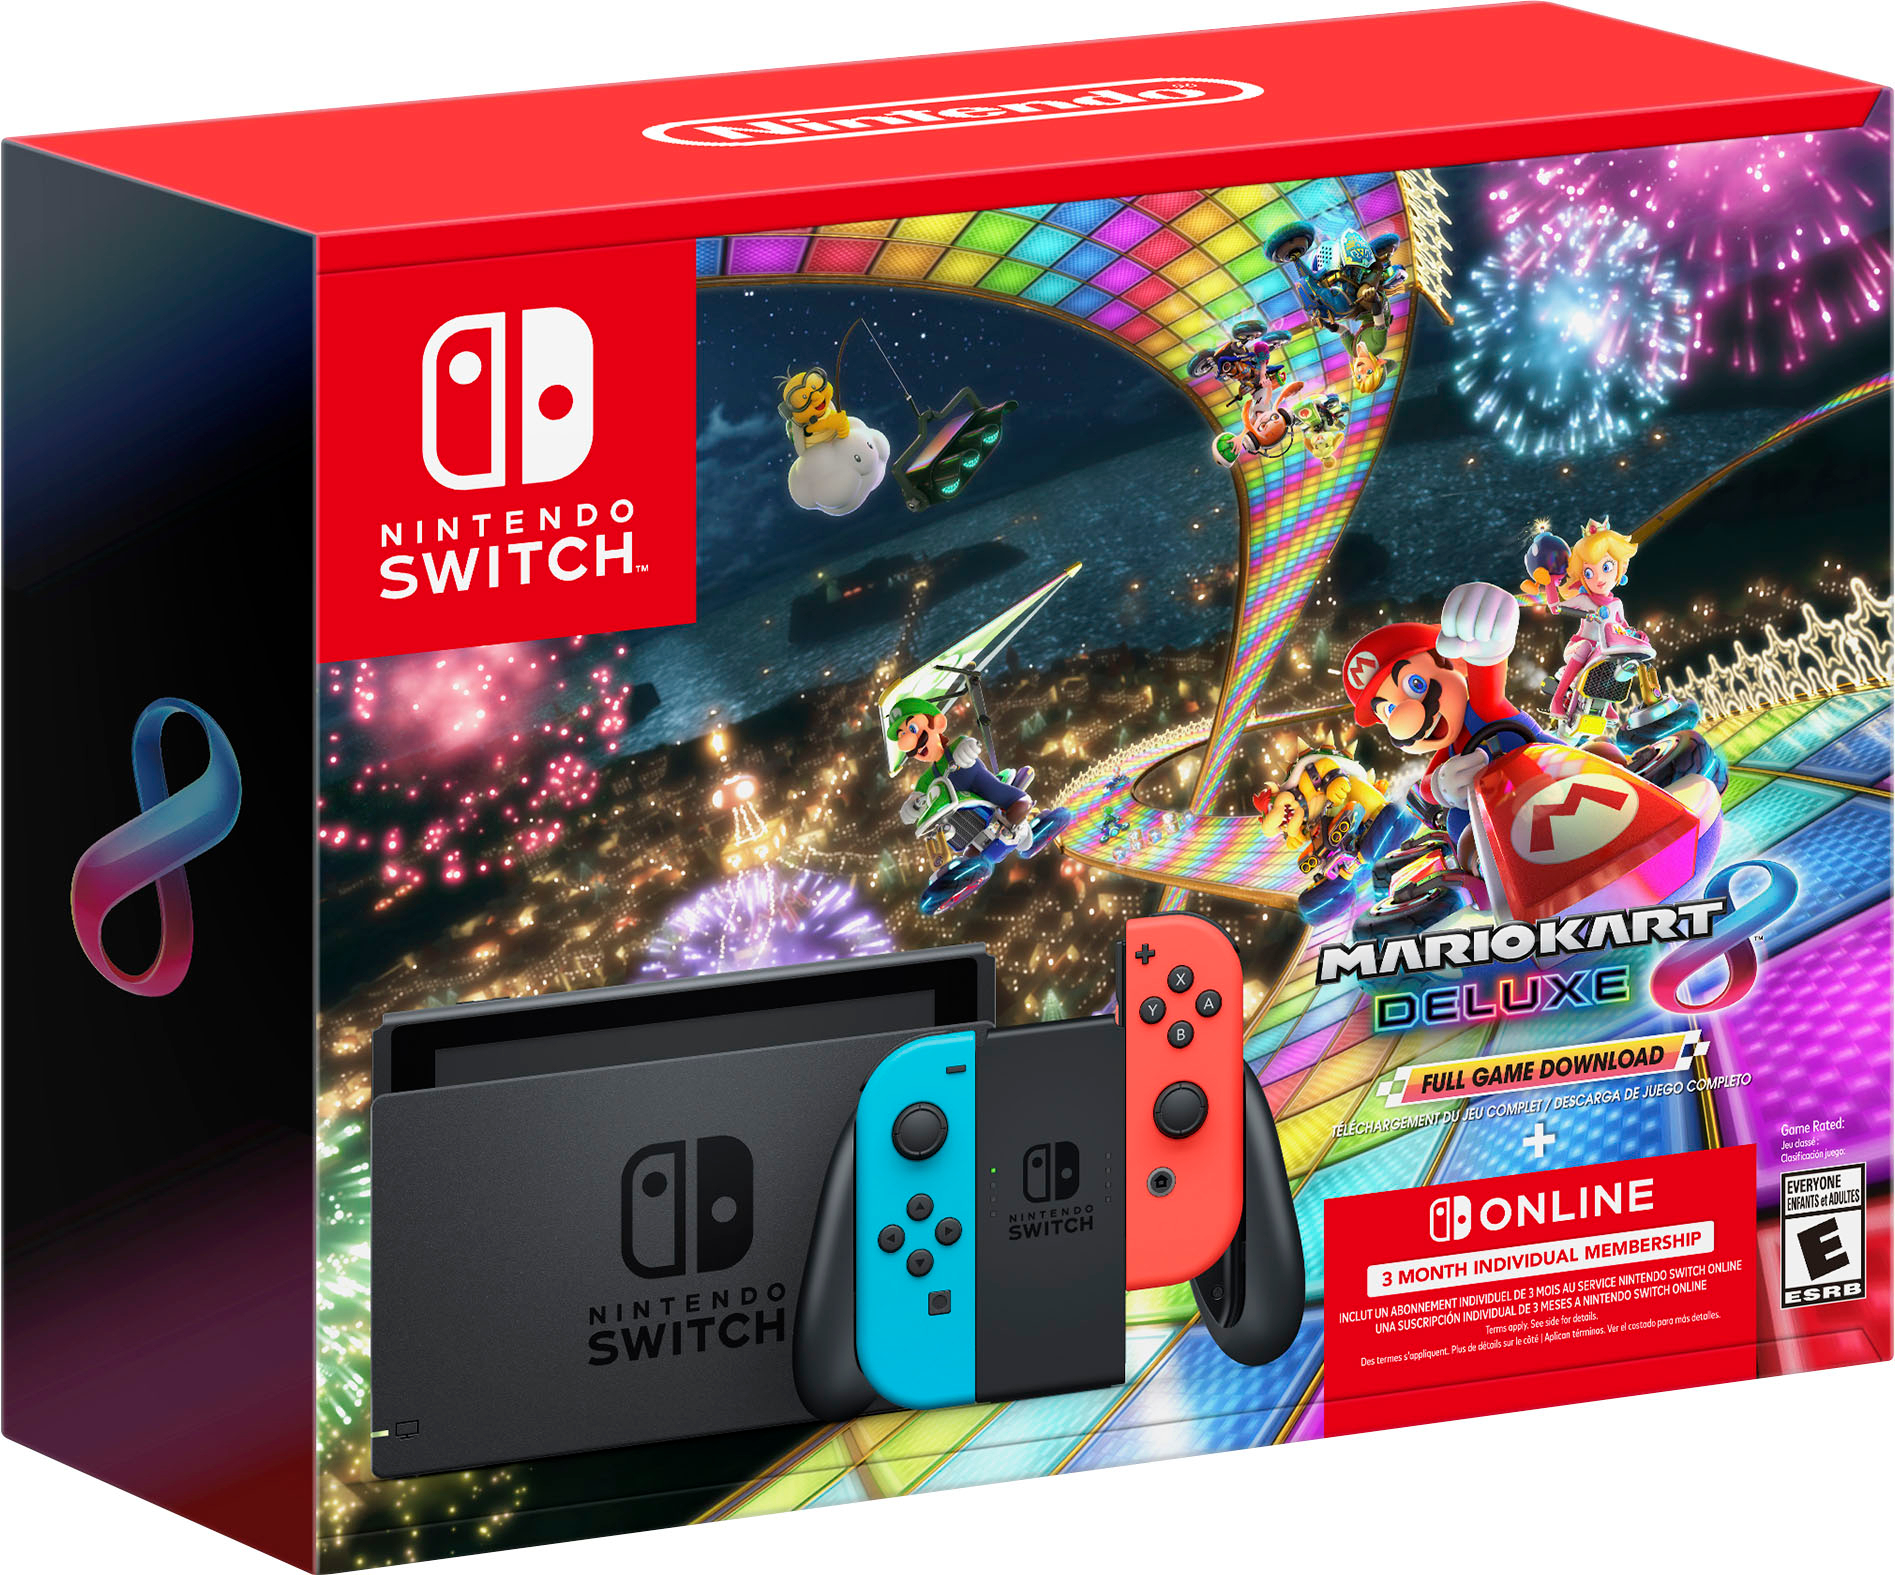 Nintendo Switch in Neon with Mario Kart and Accessories 975115638M, Color:  Neon - JCPenney